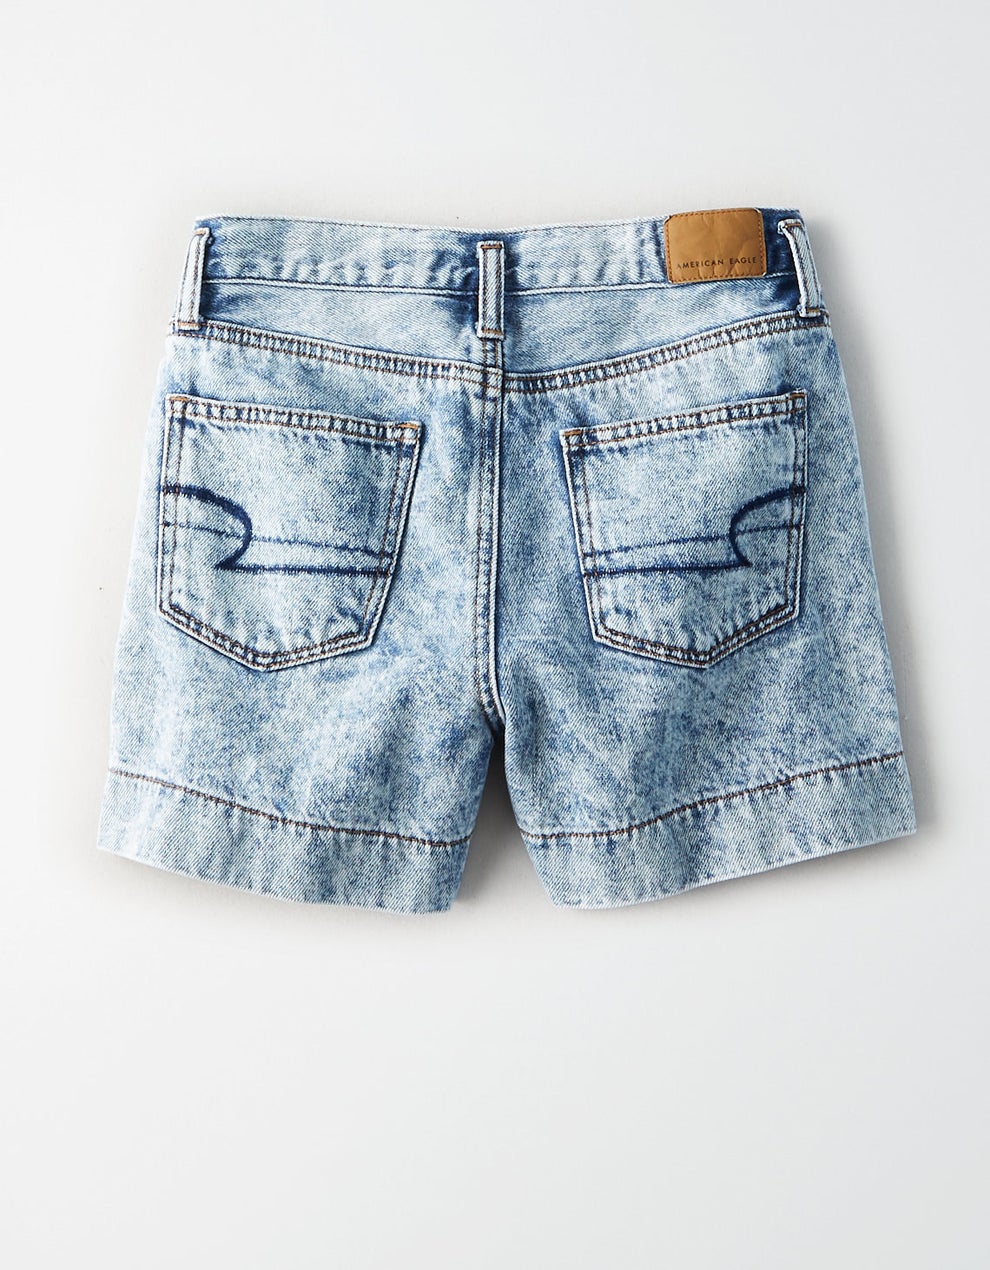 I Guarantee You Will Find Your New Favorite Pair Of Shorts In This Post